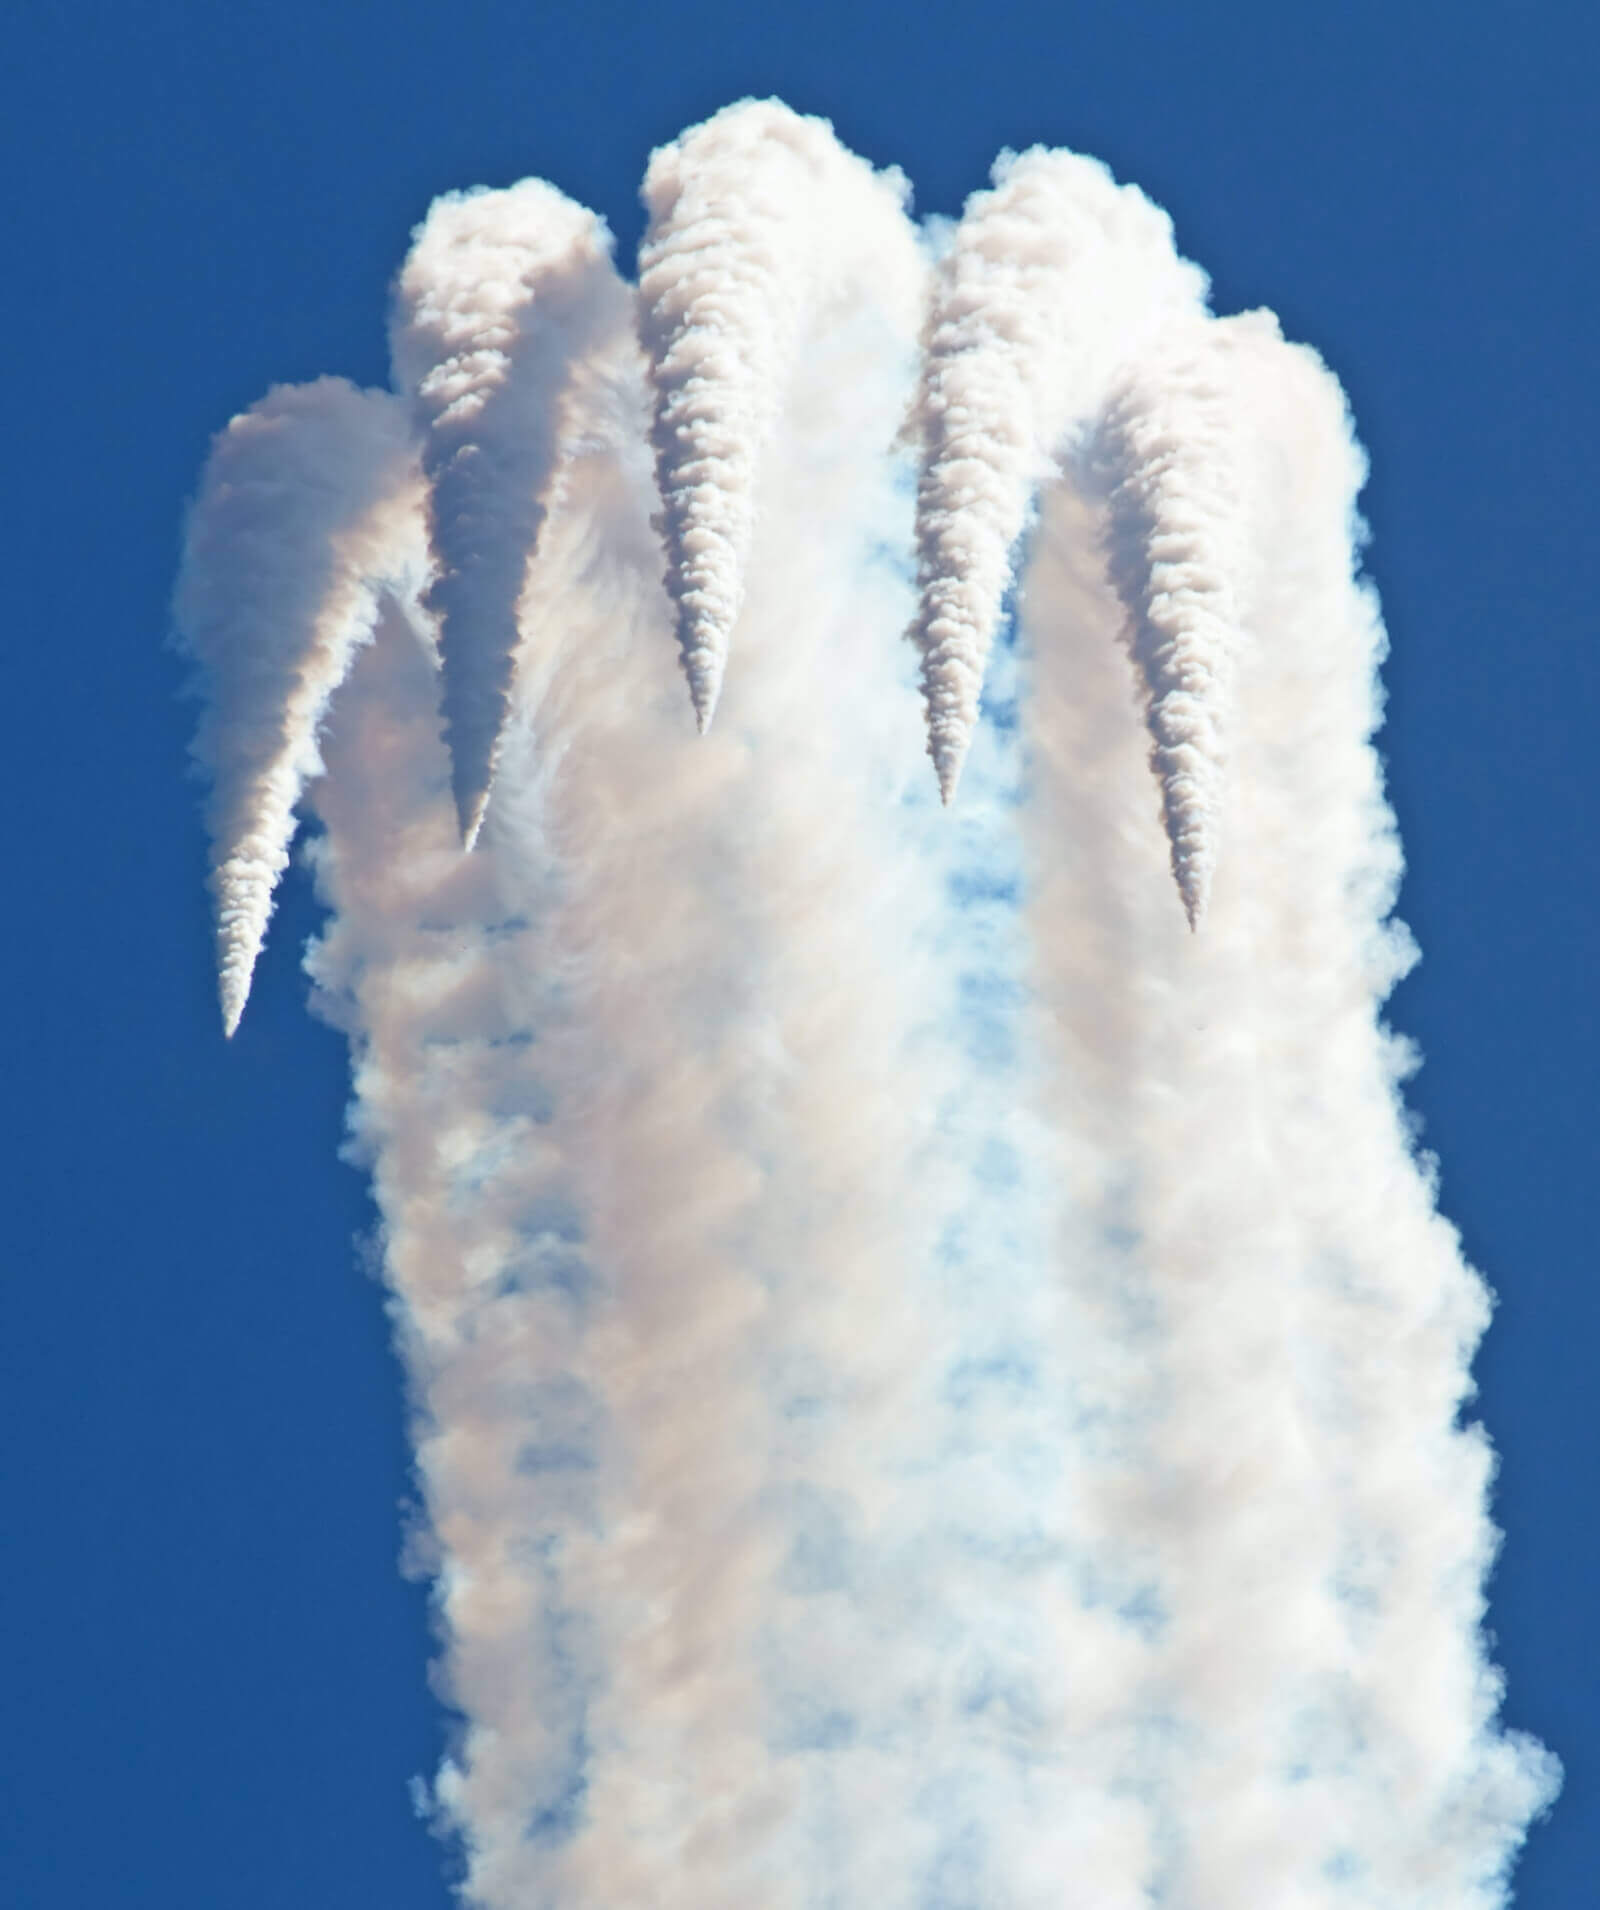 Red Arrows 7 by Tony Hisgett under the Creative Commons Attribution 2.0 Generic License CC BY 2.0 (https://creativecommons.org/licenses/by/2.0/legalcode)